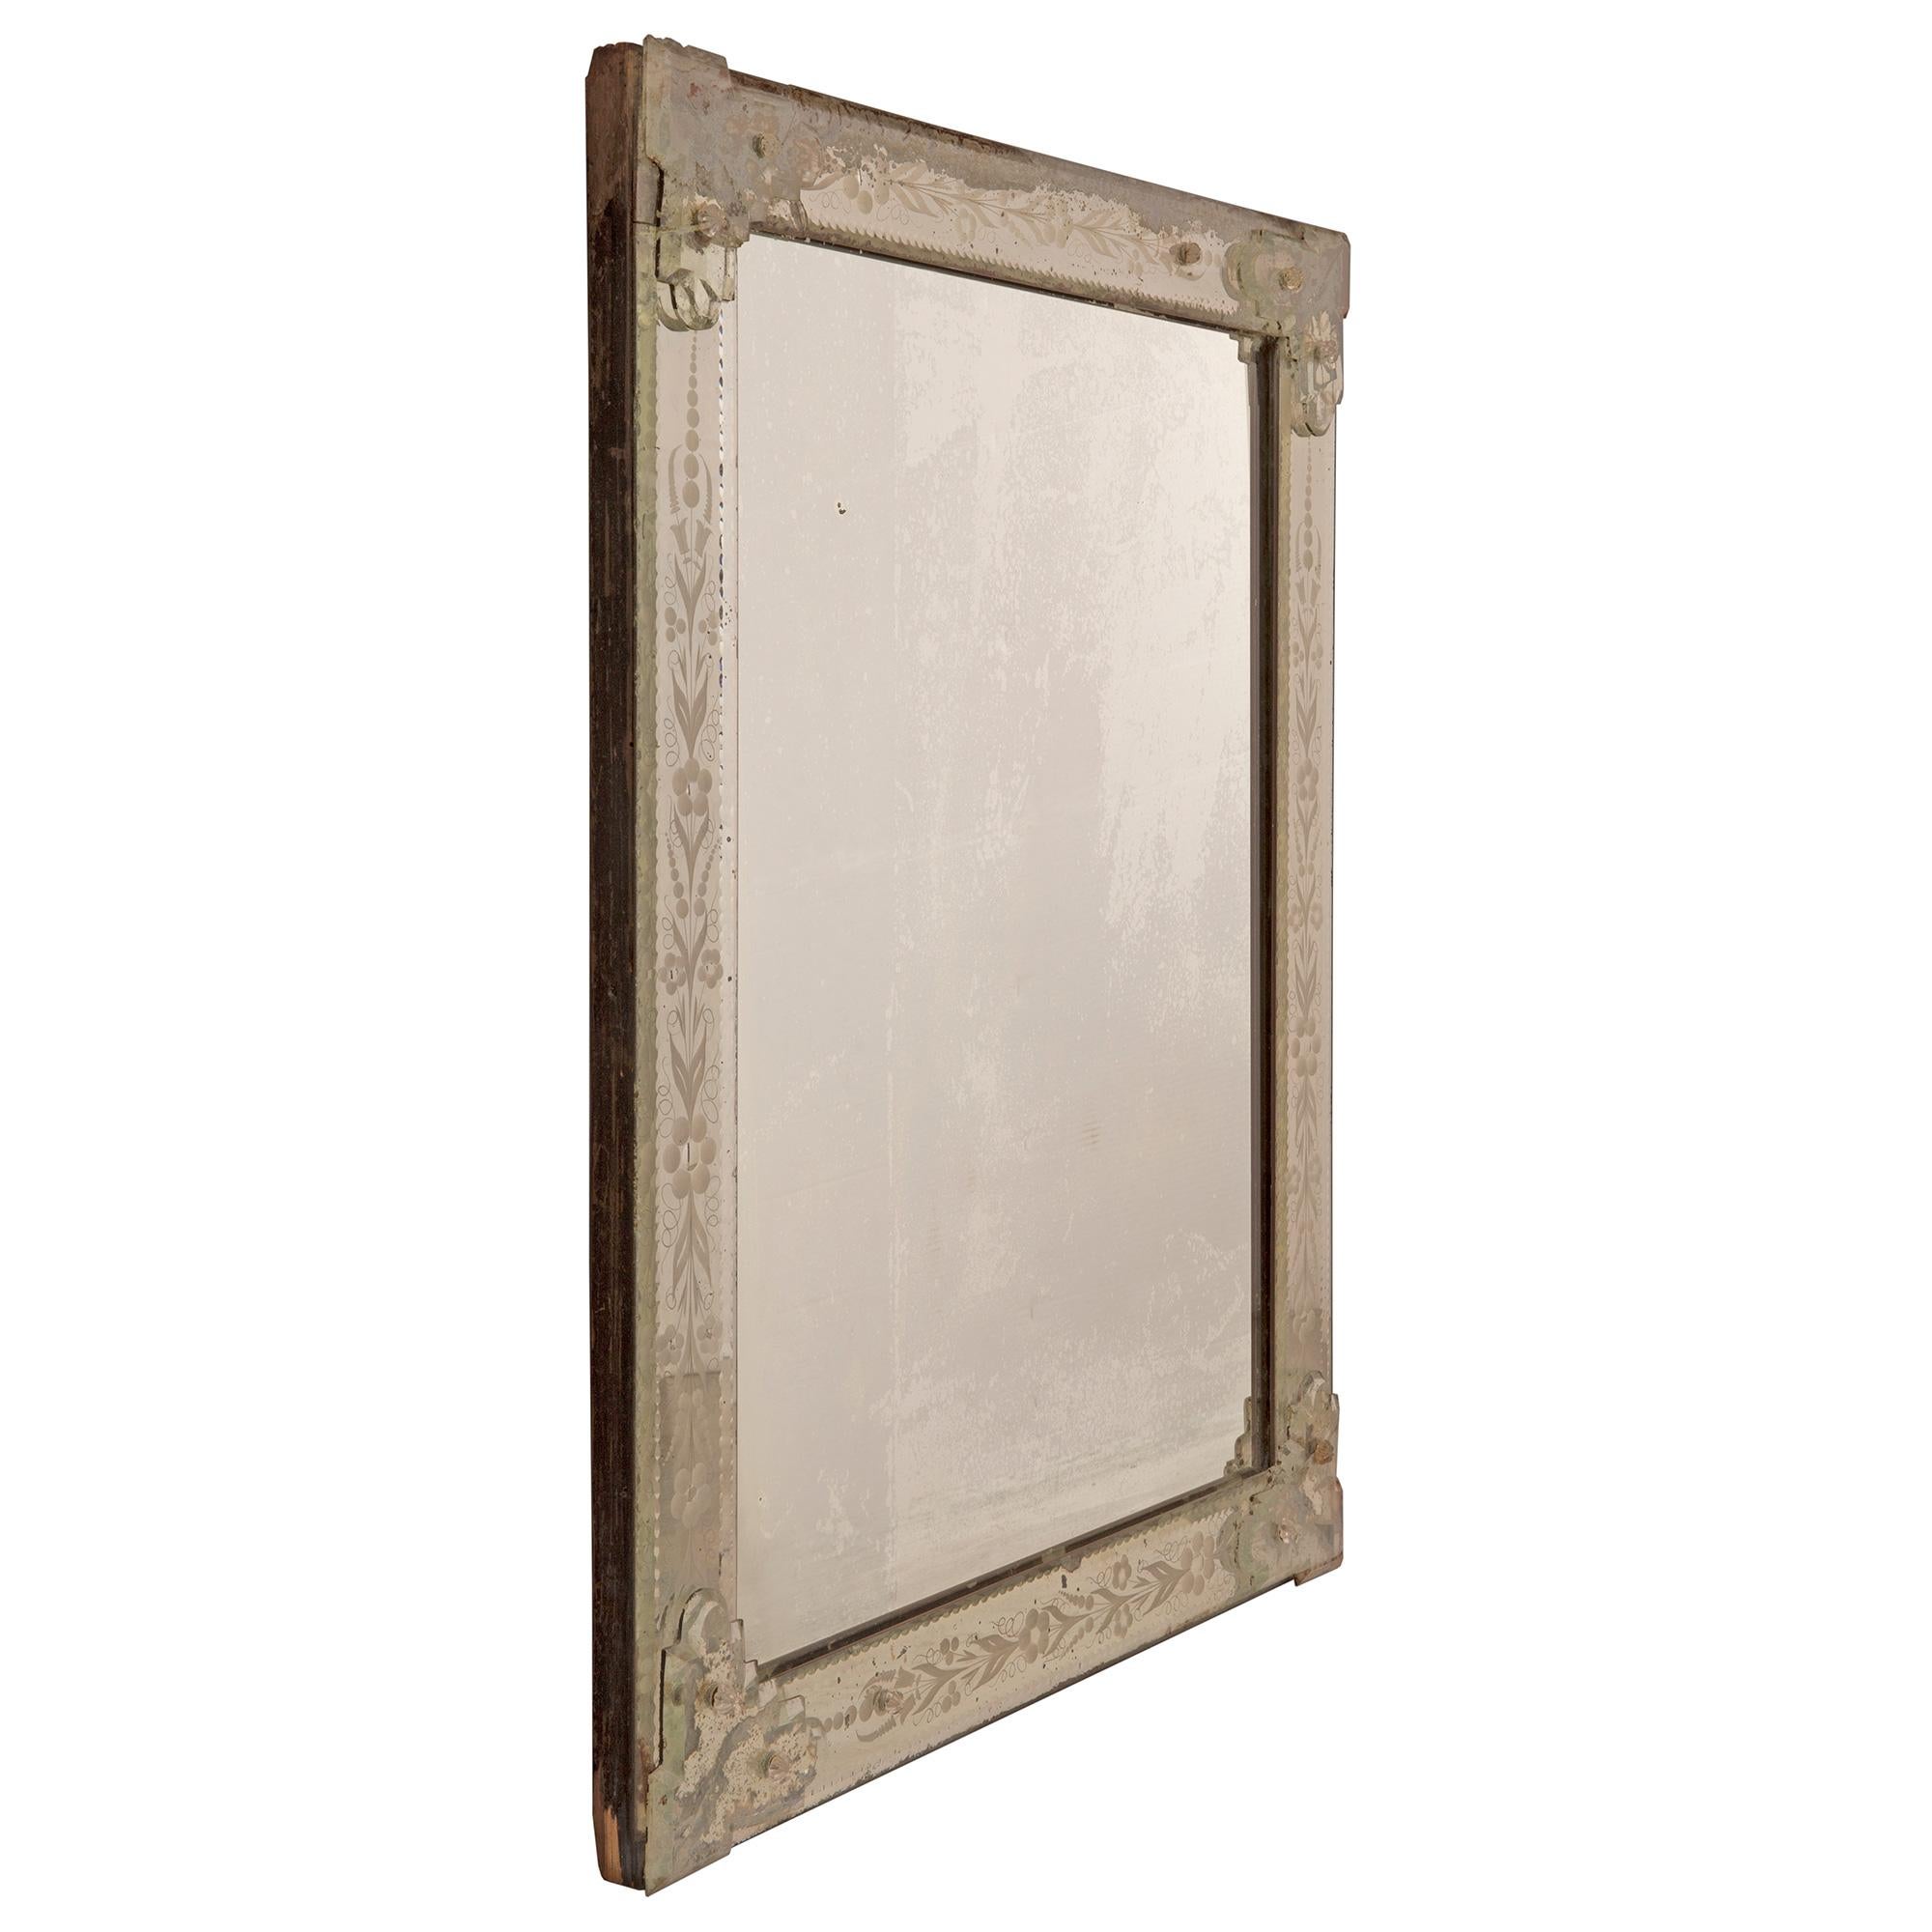 A most attractive Italian 19th century Venetian st. etched mirror. The original mirror plate is framed within additional original elegant and finely detailed etched mirror plates. The outer mirror plates display beautiful finely etched foliate